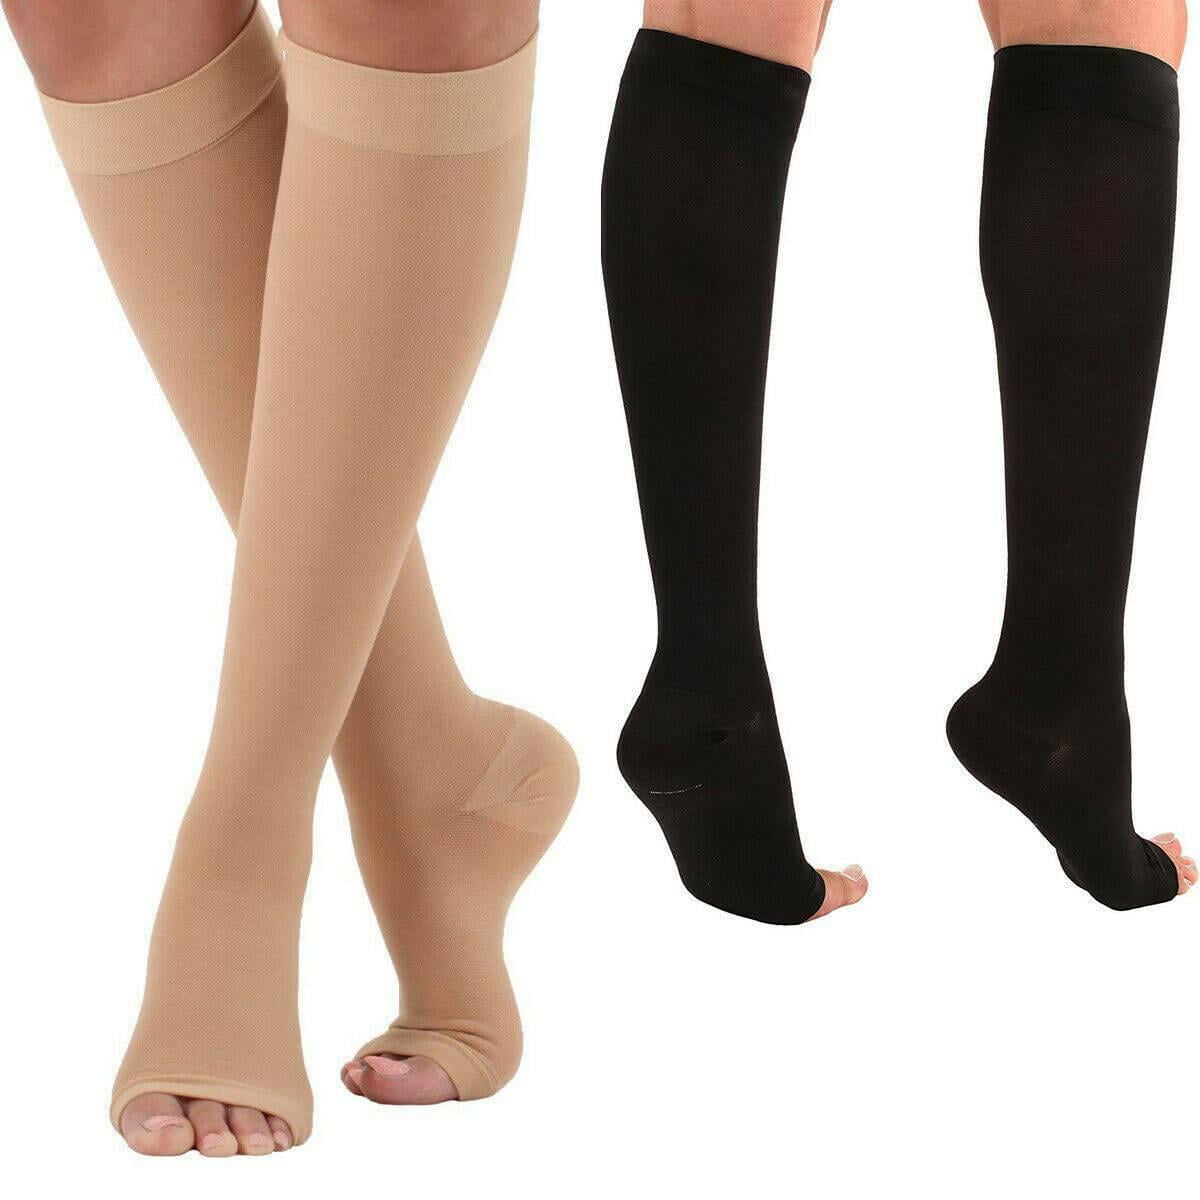 1 Pair Medical Compression Socks Support Varicose Veins Open Toe 18 21mmhg Stockings